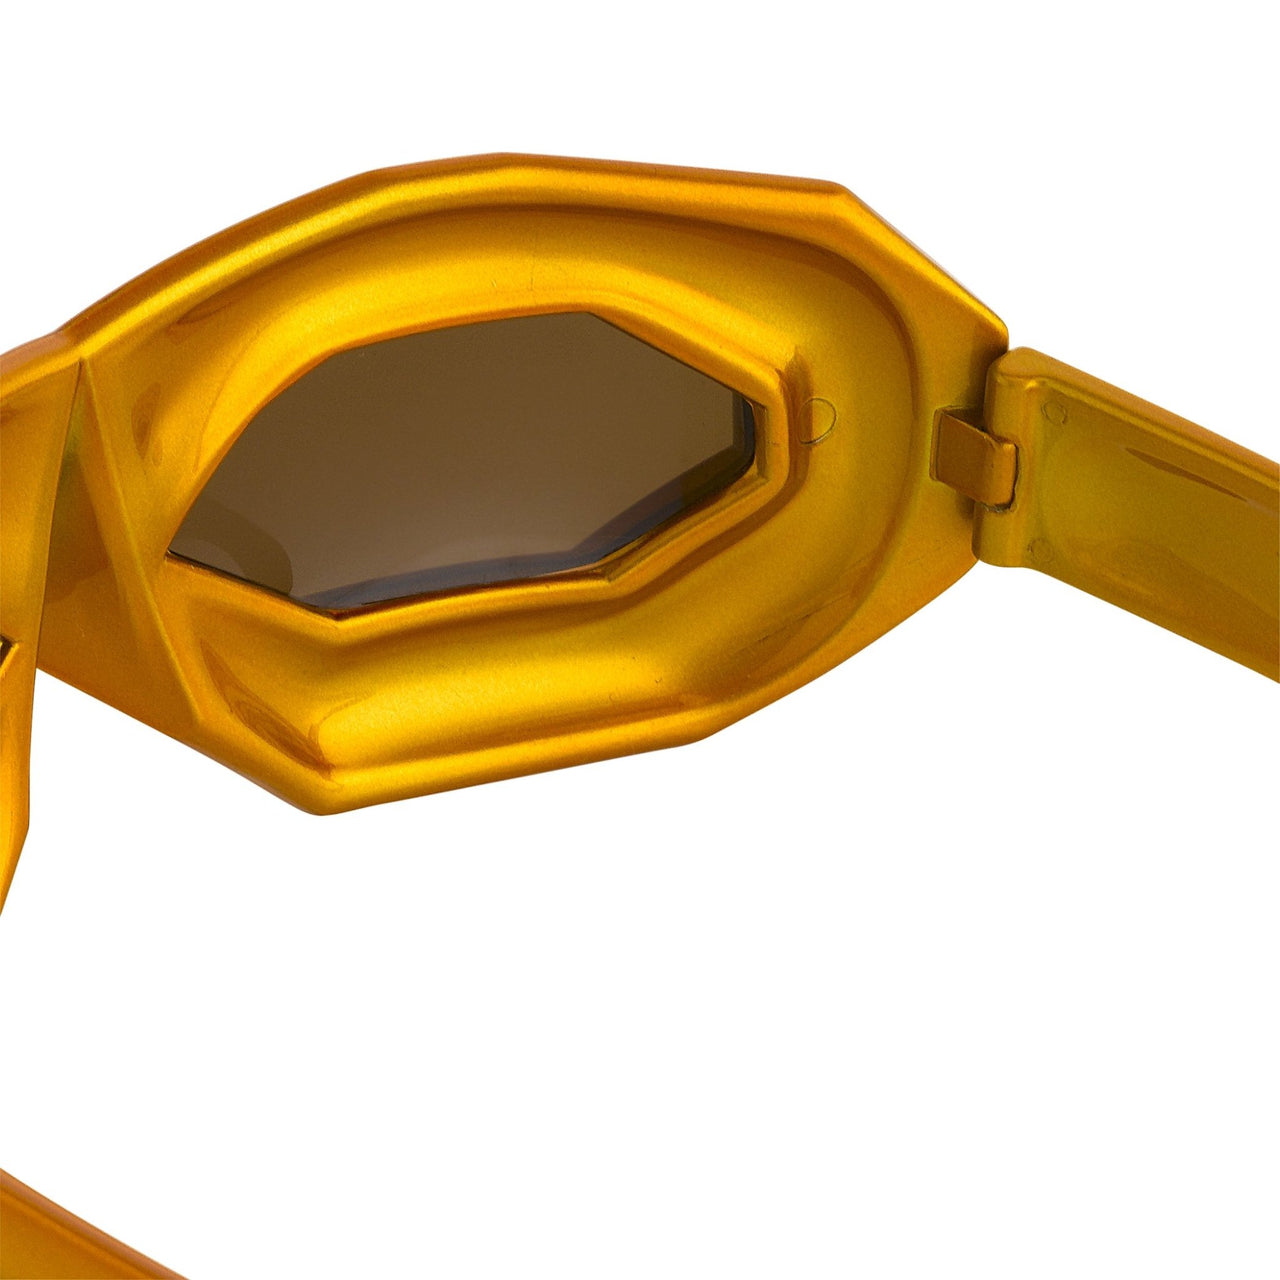 Walter Van Beirendonck Sunglasses Special Frame Shiny Gold and Brown Lenses - WVB2C10SUN - Watches & Crystals